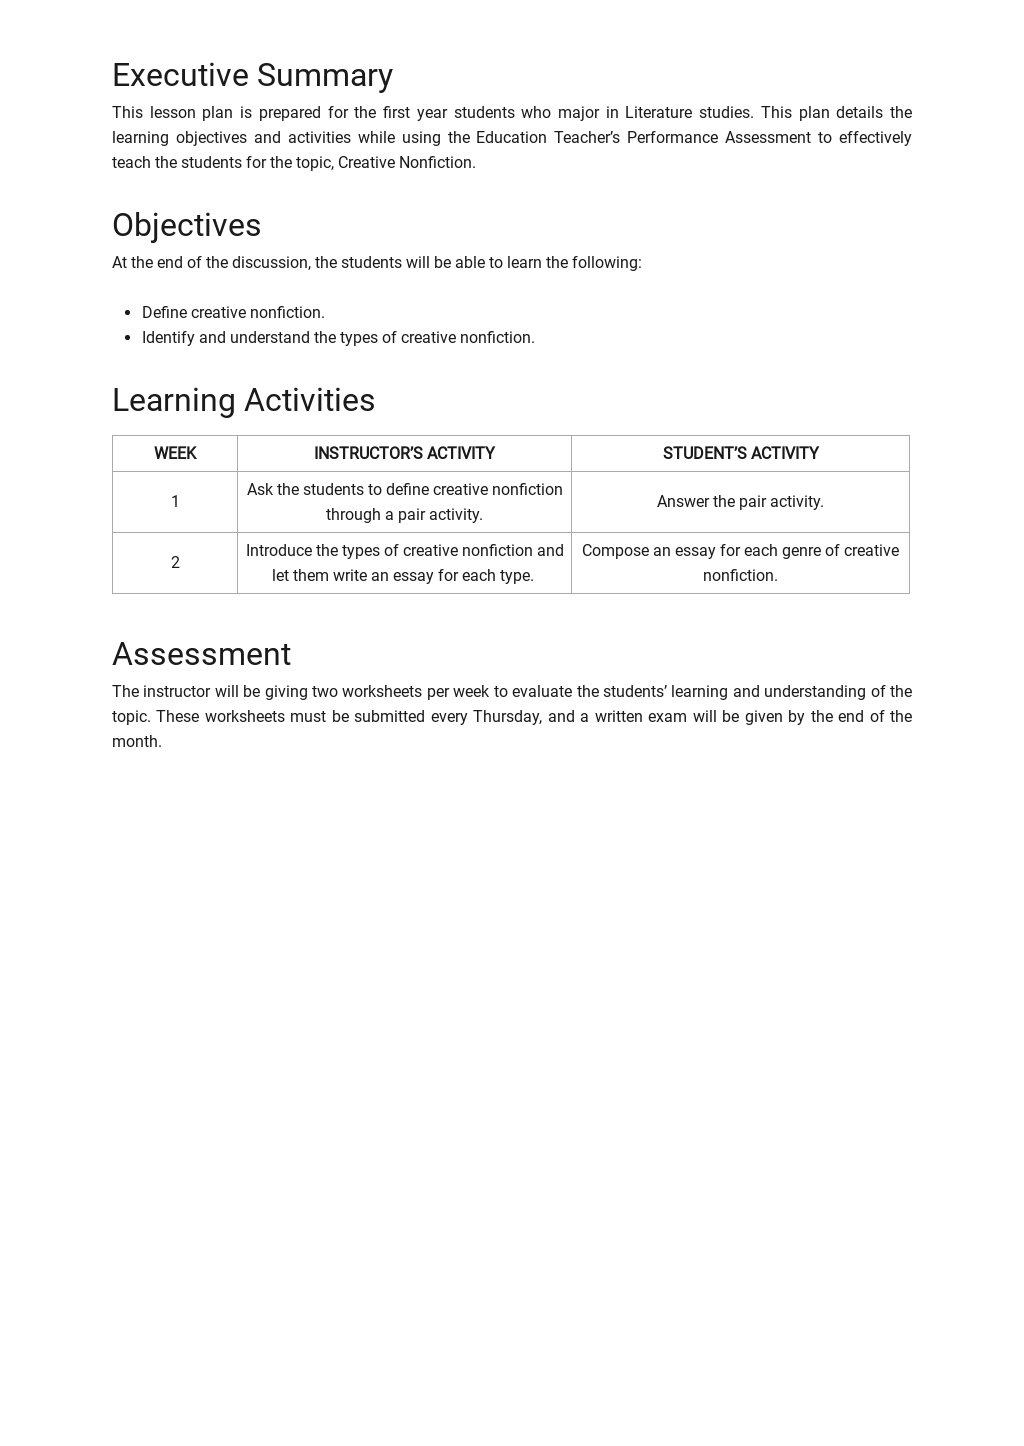 edtpa-lesson-plan-template-in-google-docs-word-template